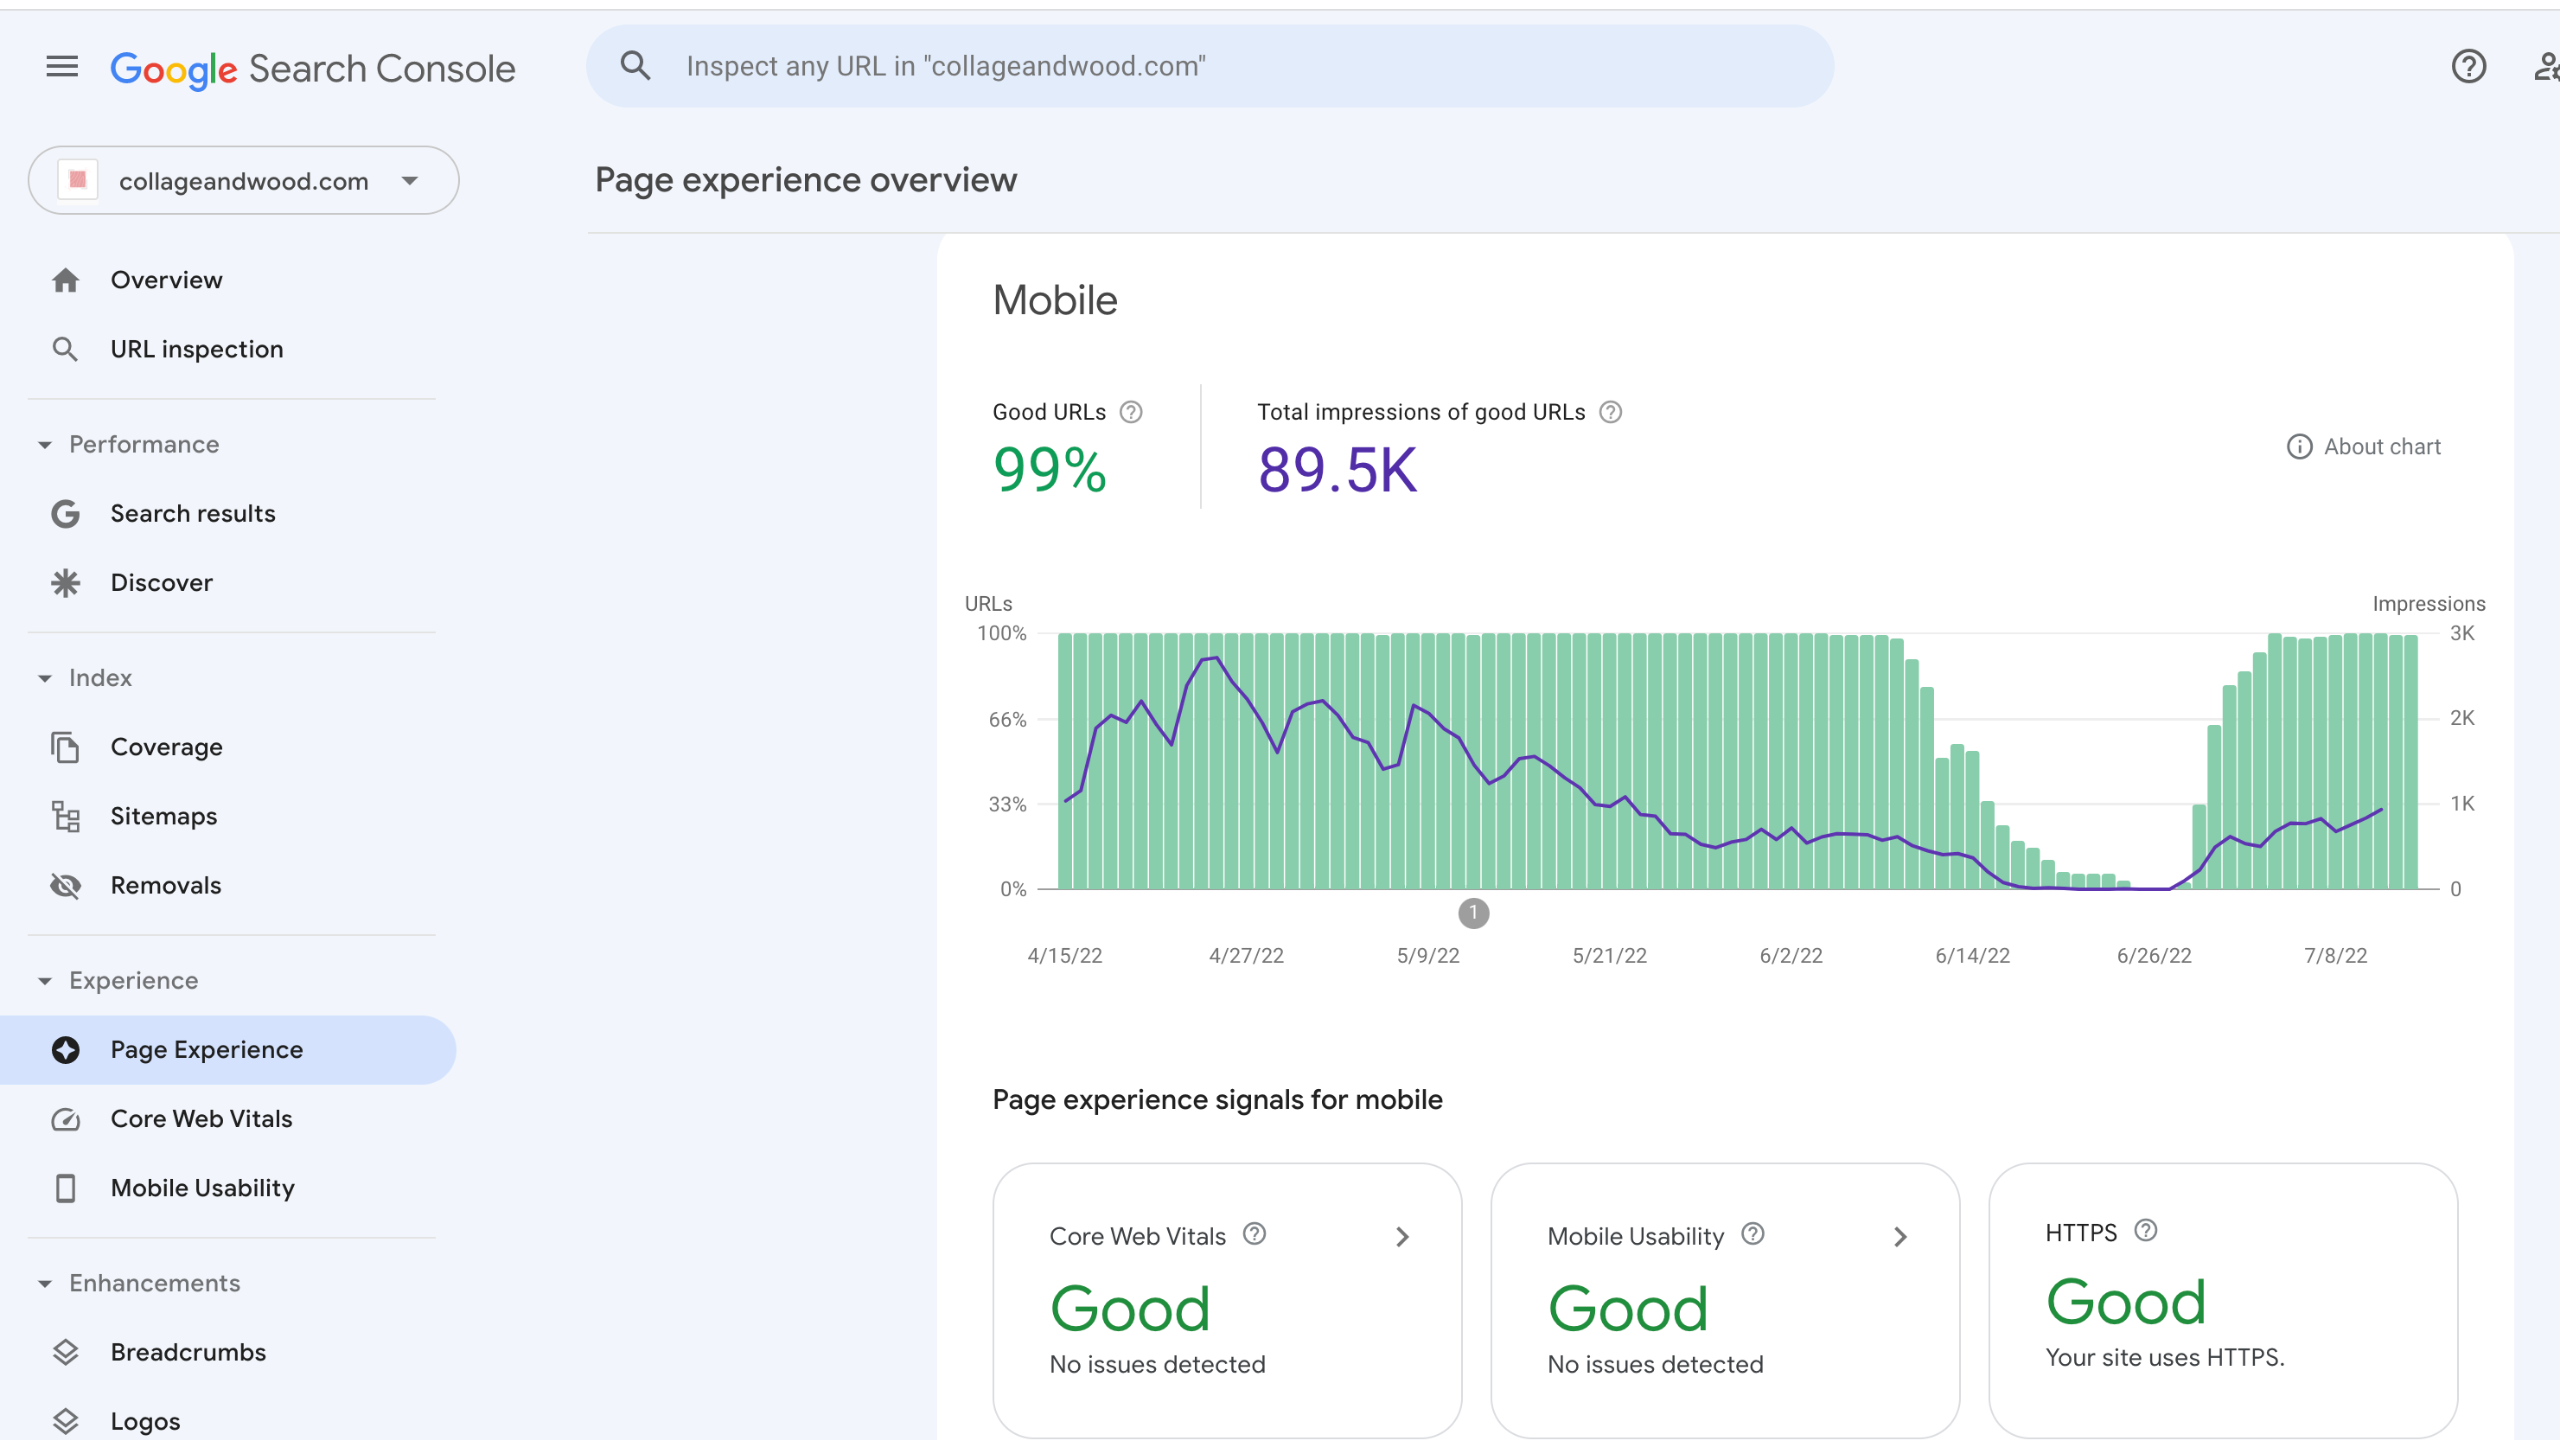 Monitor your SEO progress, page experience, and Core Web Vitals with tools like Google Search Console